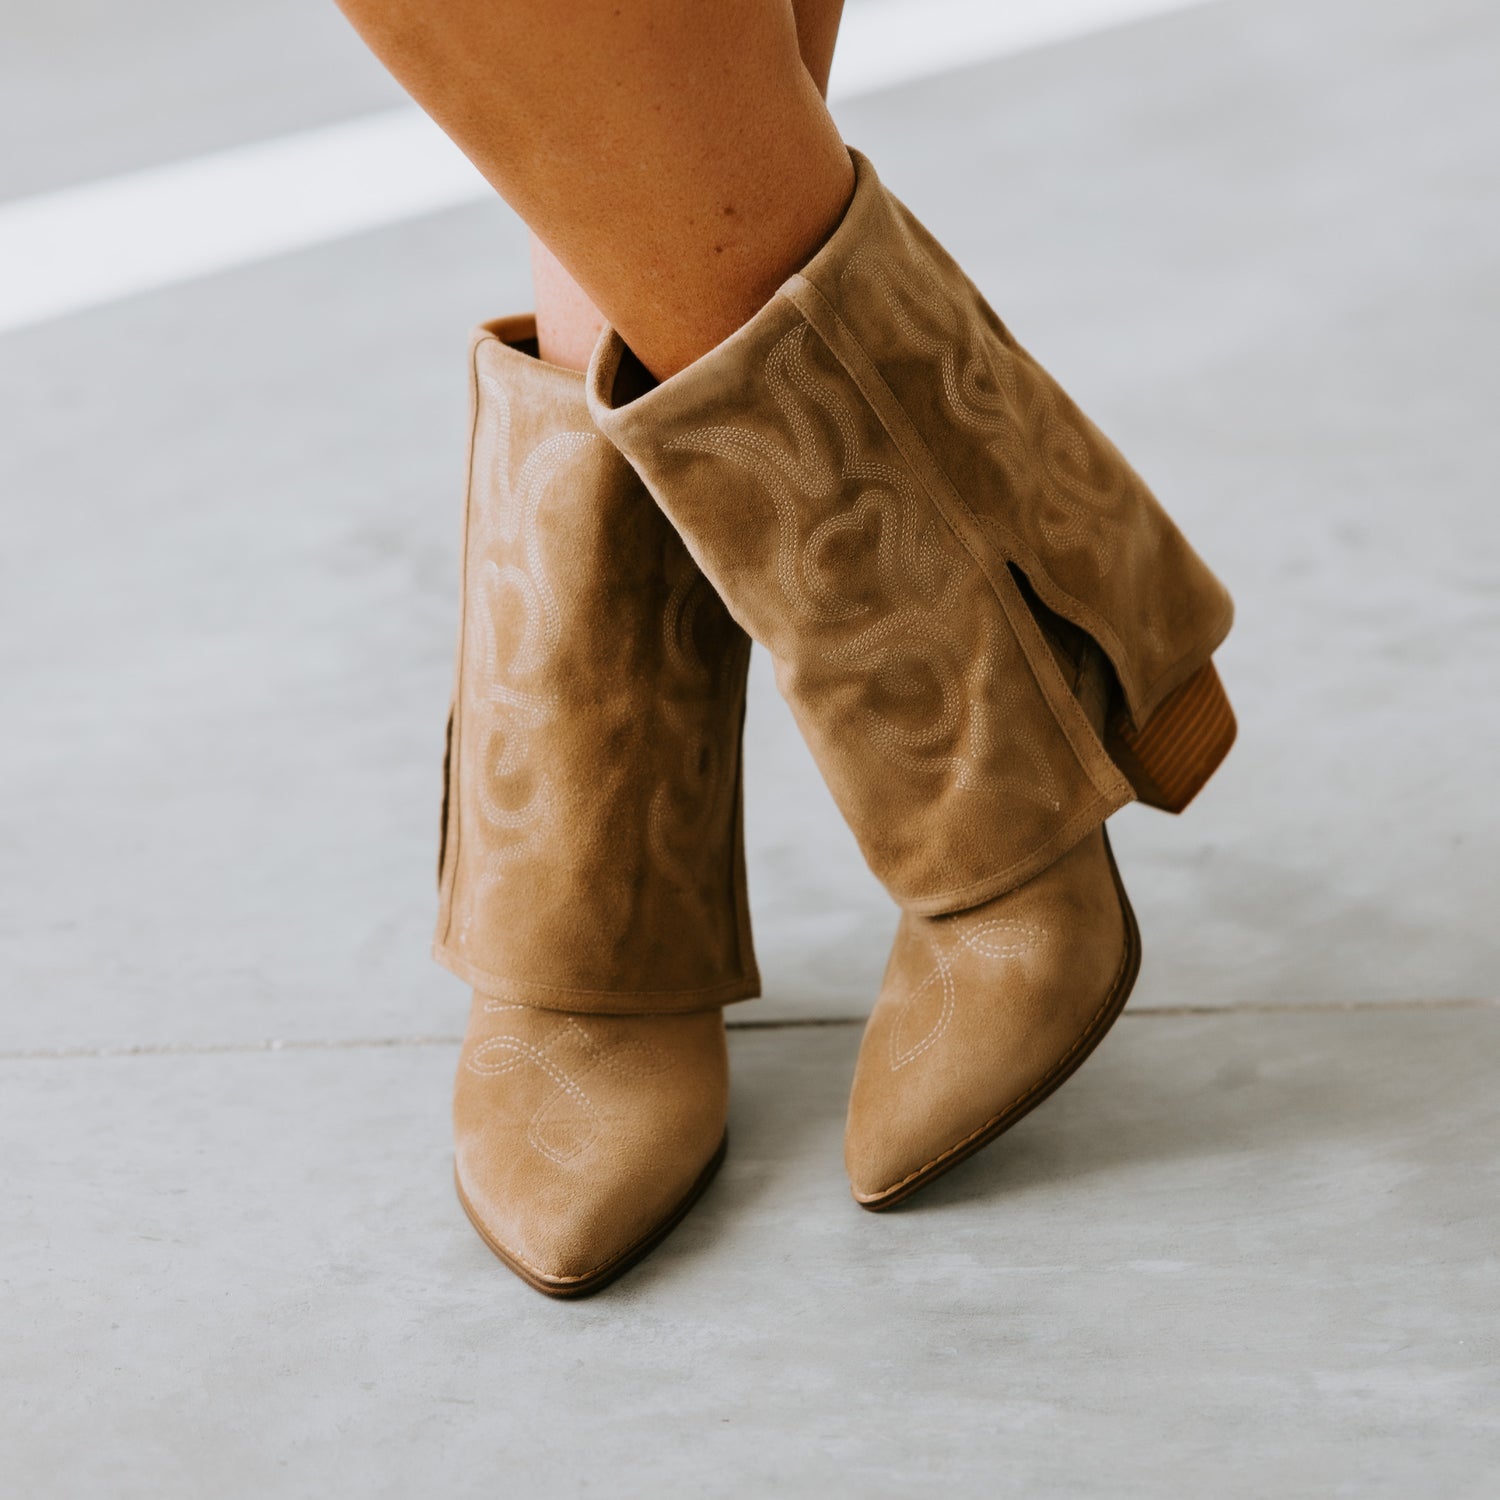 Steve Madden Layne Suede Boots